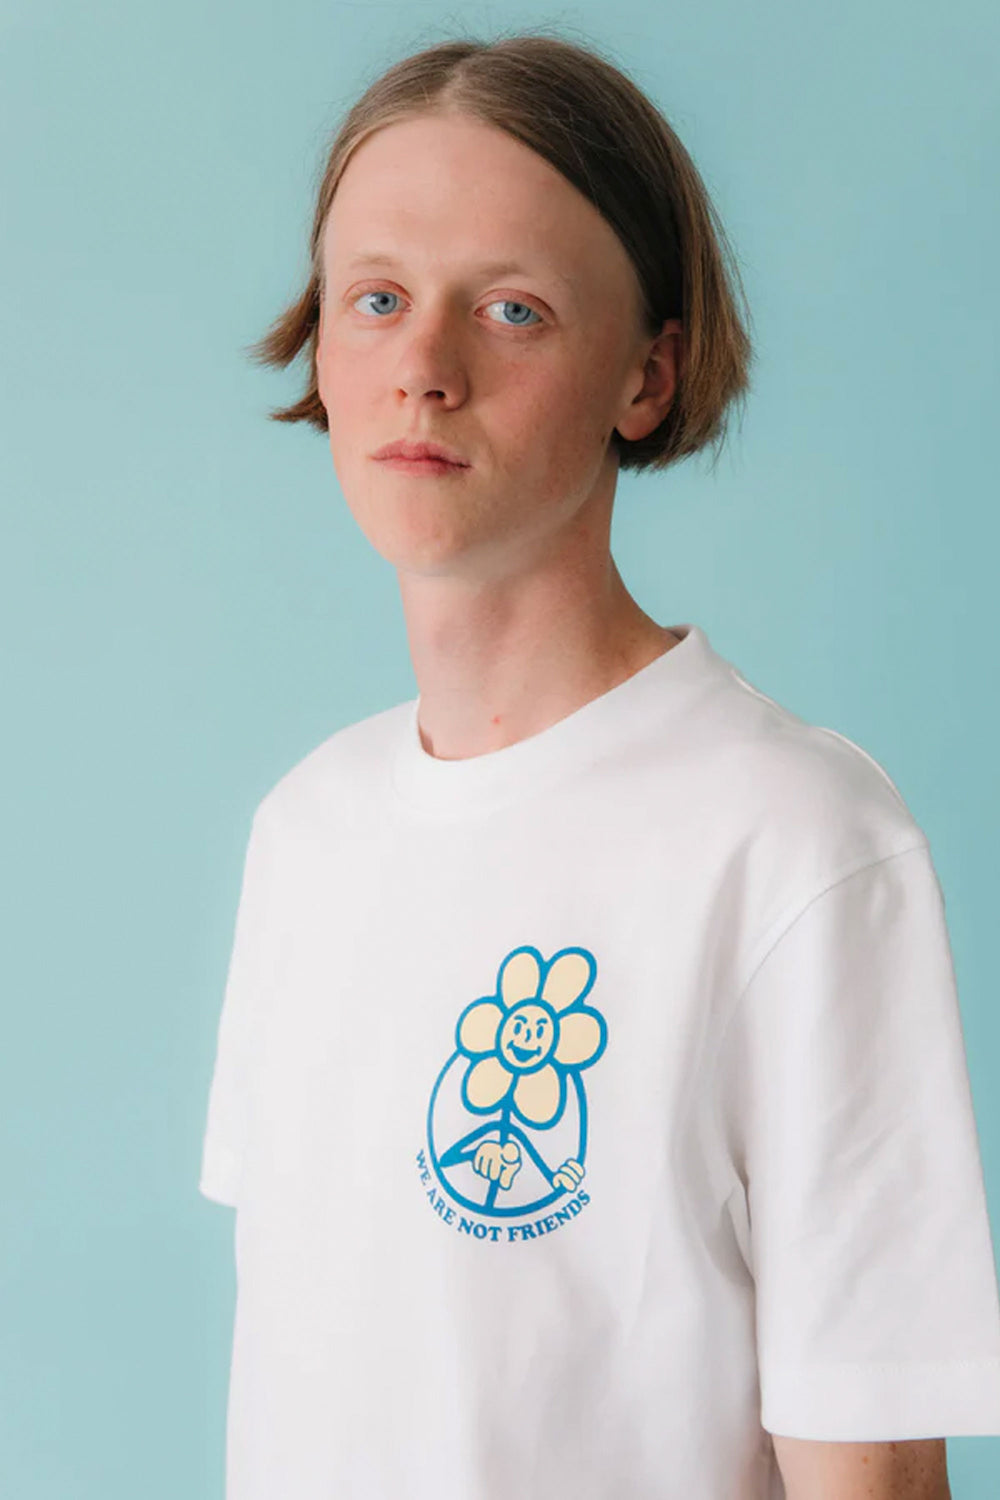 Pukas-surf-shop-We-are-not-friends-Daisy-Logo-White-Tee